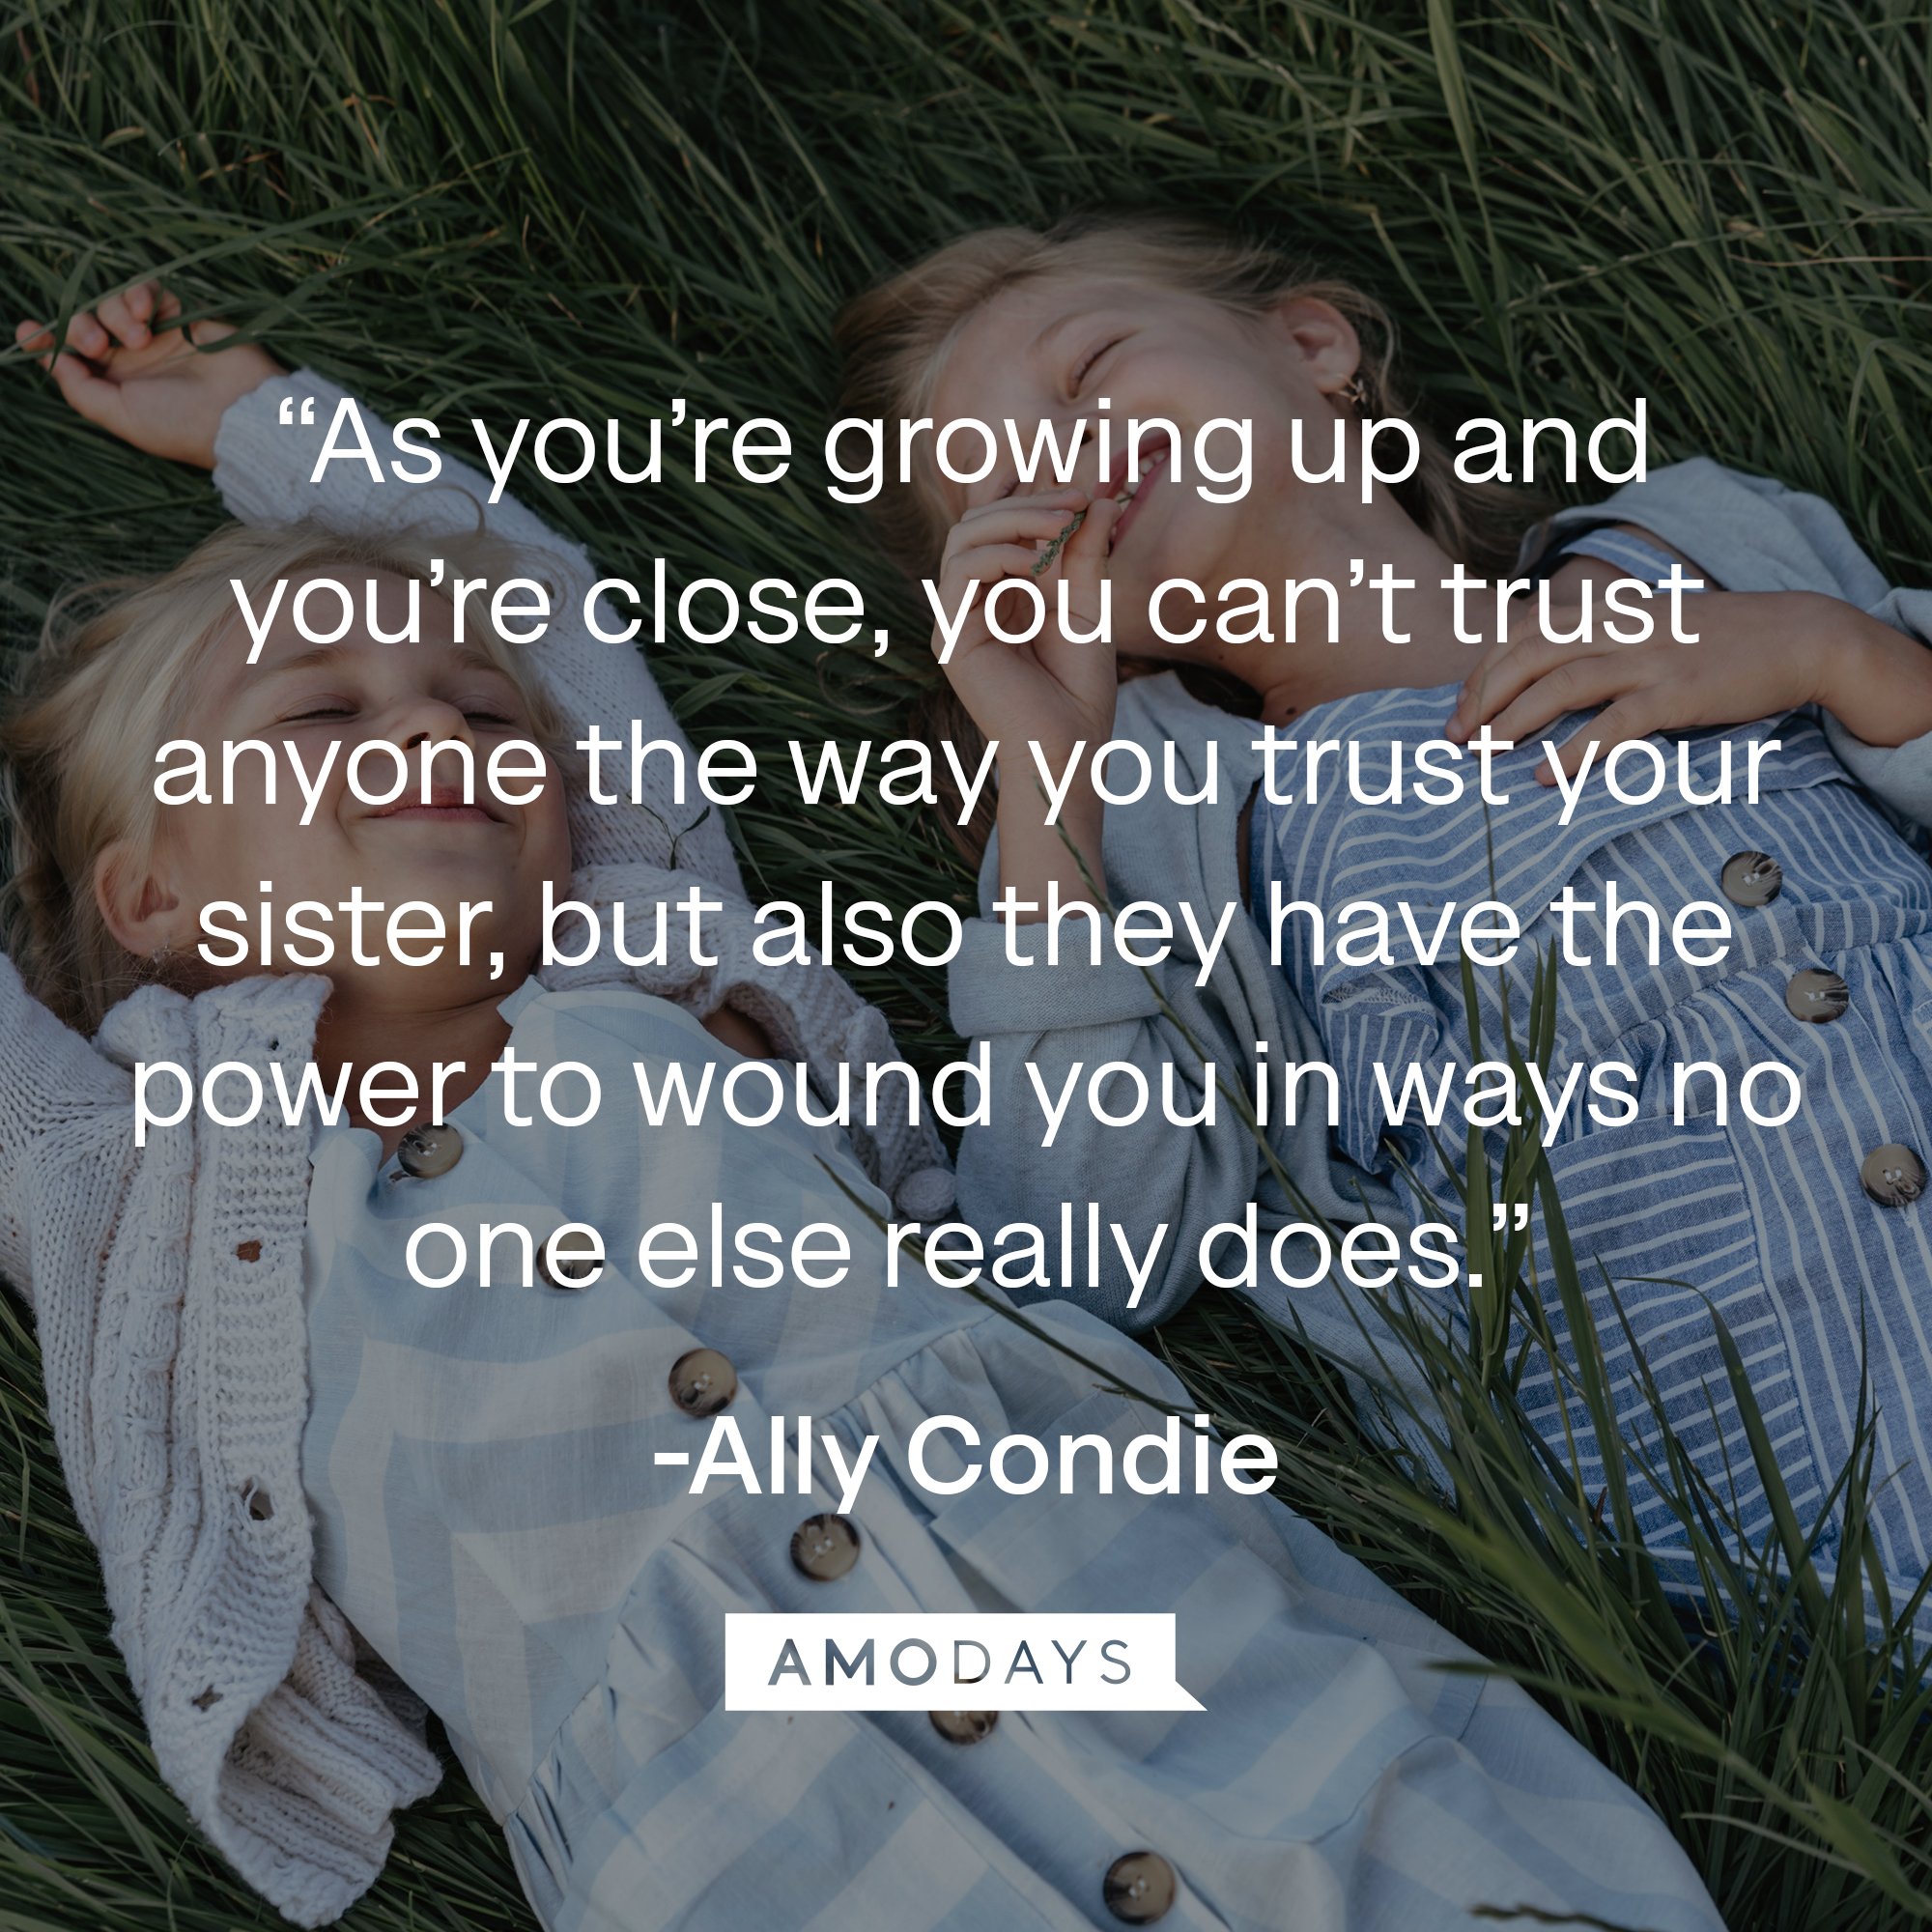 Ally Condie's quote: “As you’re growing up and you’re close, you can’t trust anyone the way you trust your sister, but also they have the power to wound you in ways no one else really does.” | Image: AmoDays